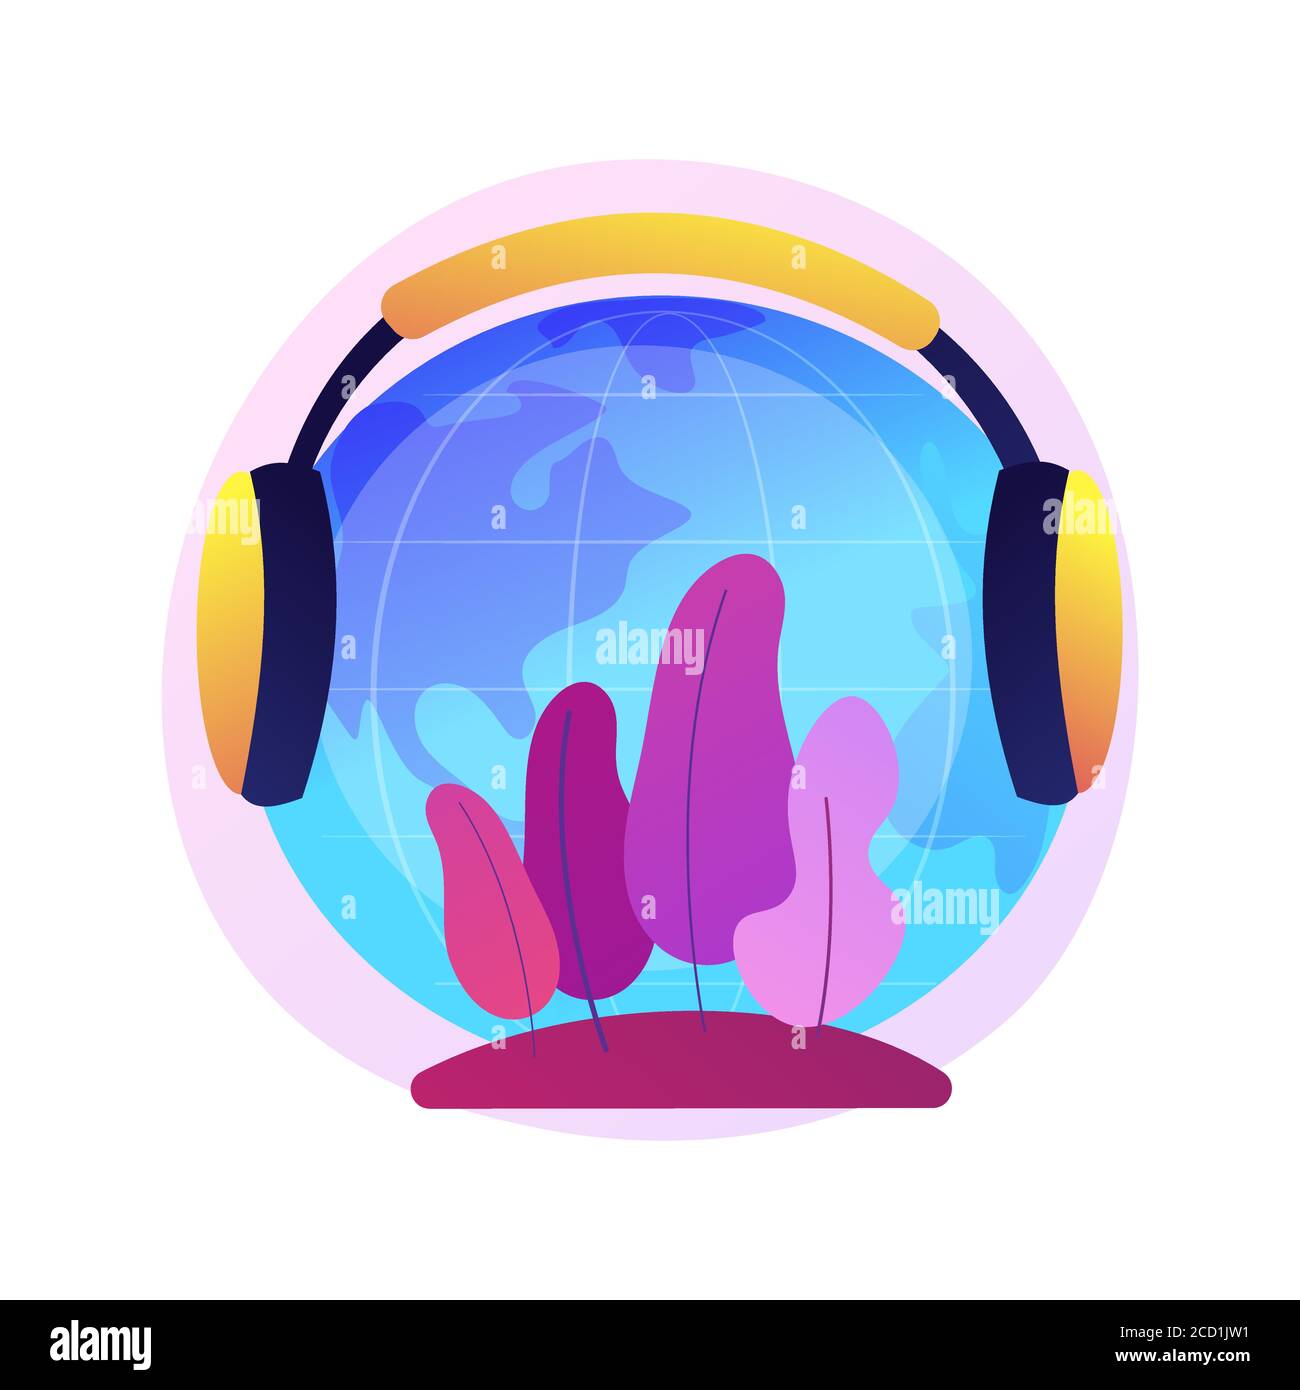 Noise Protection Abstract Concept Vector Illustration Stock Vector Image Art Alamy